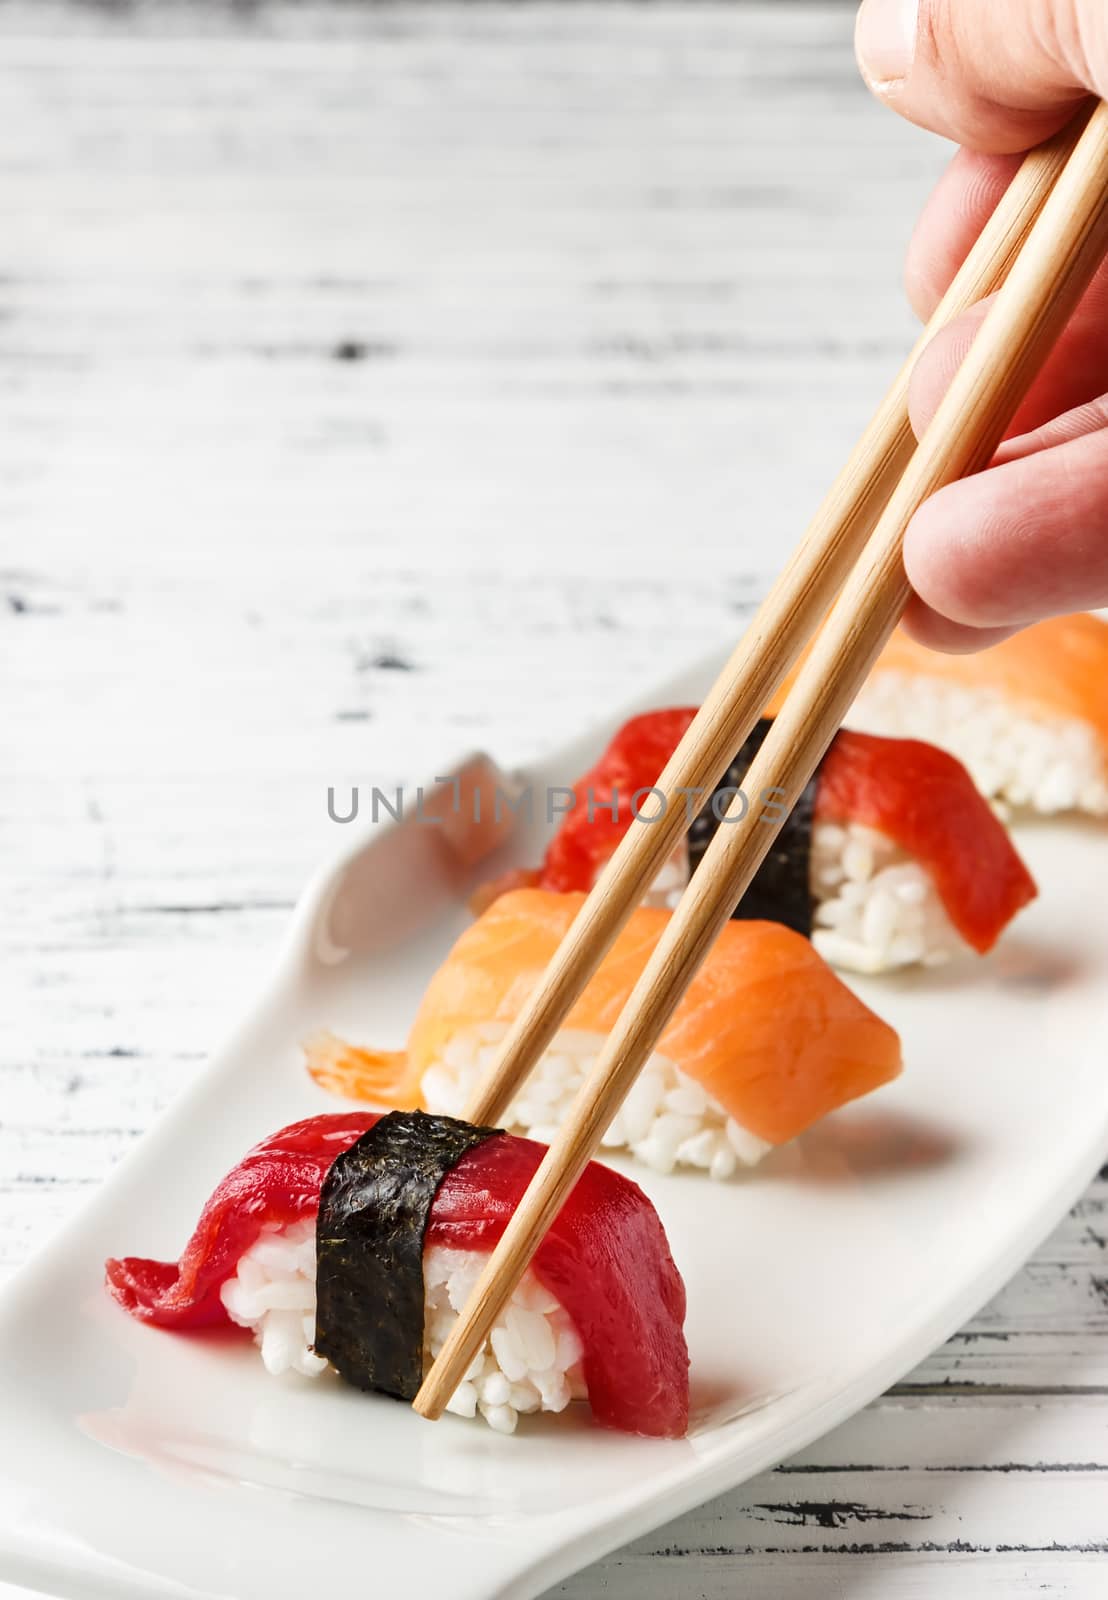  Set of salmon and red tuna Nigiris on white plate over old white wood with chopsticks. Raw fish in traditional Japanese sushi style. Vertical image.